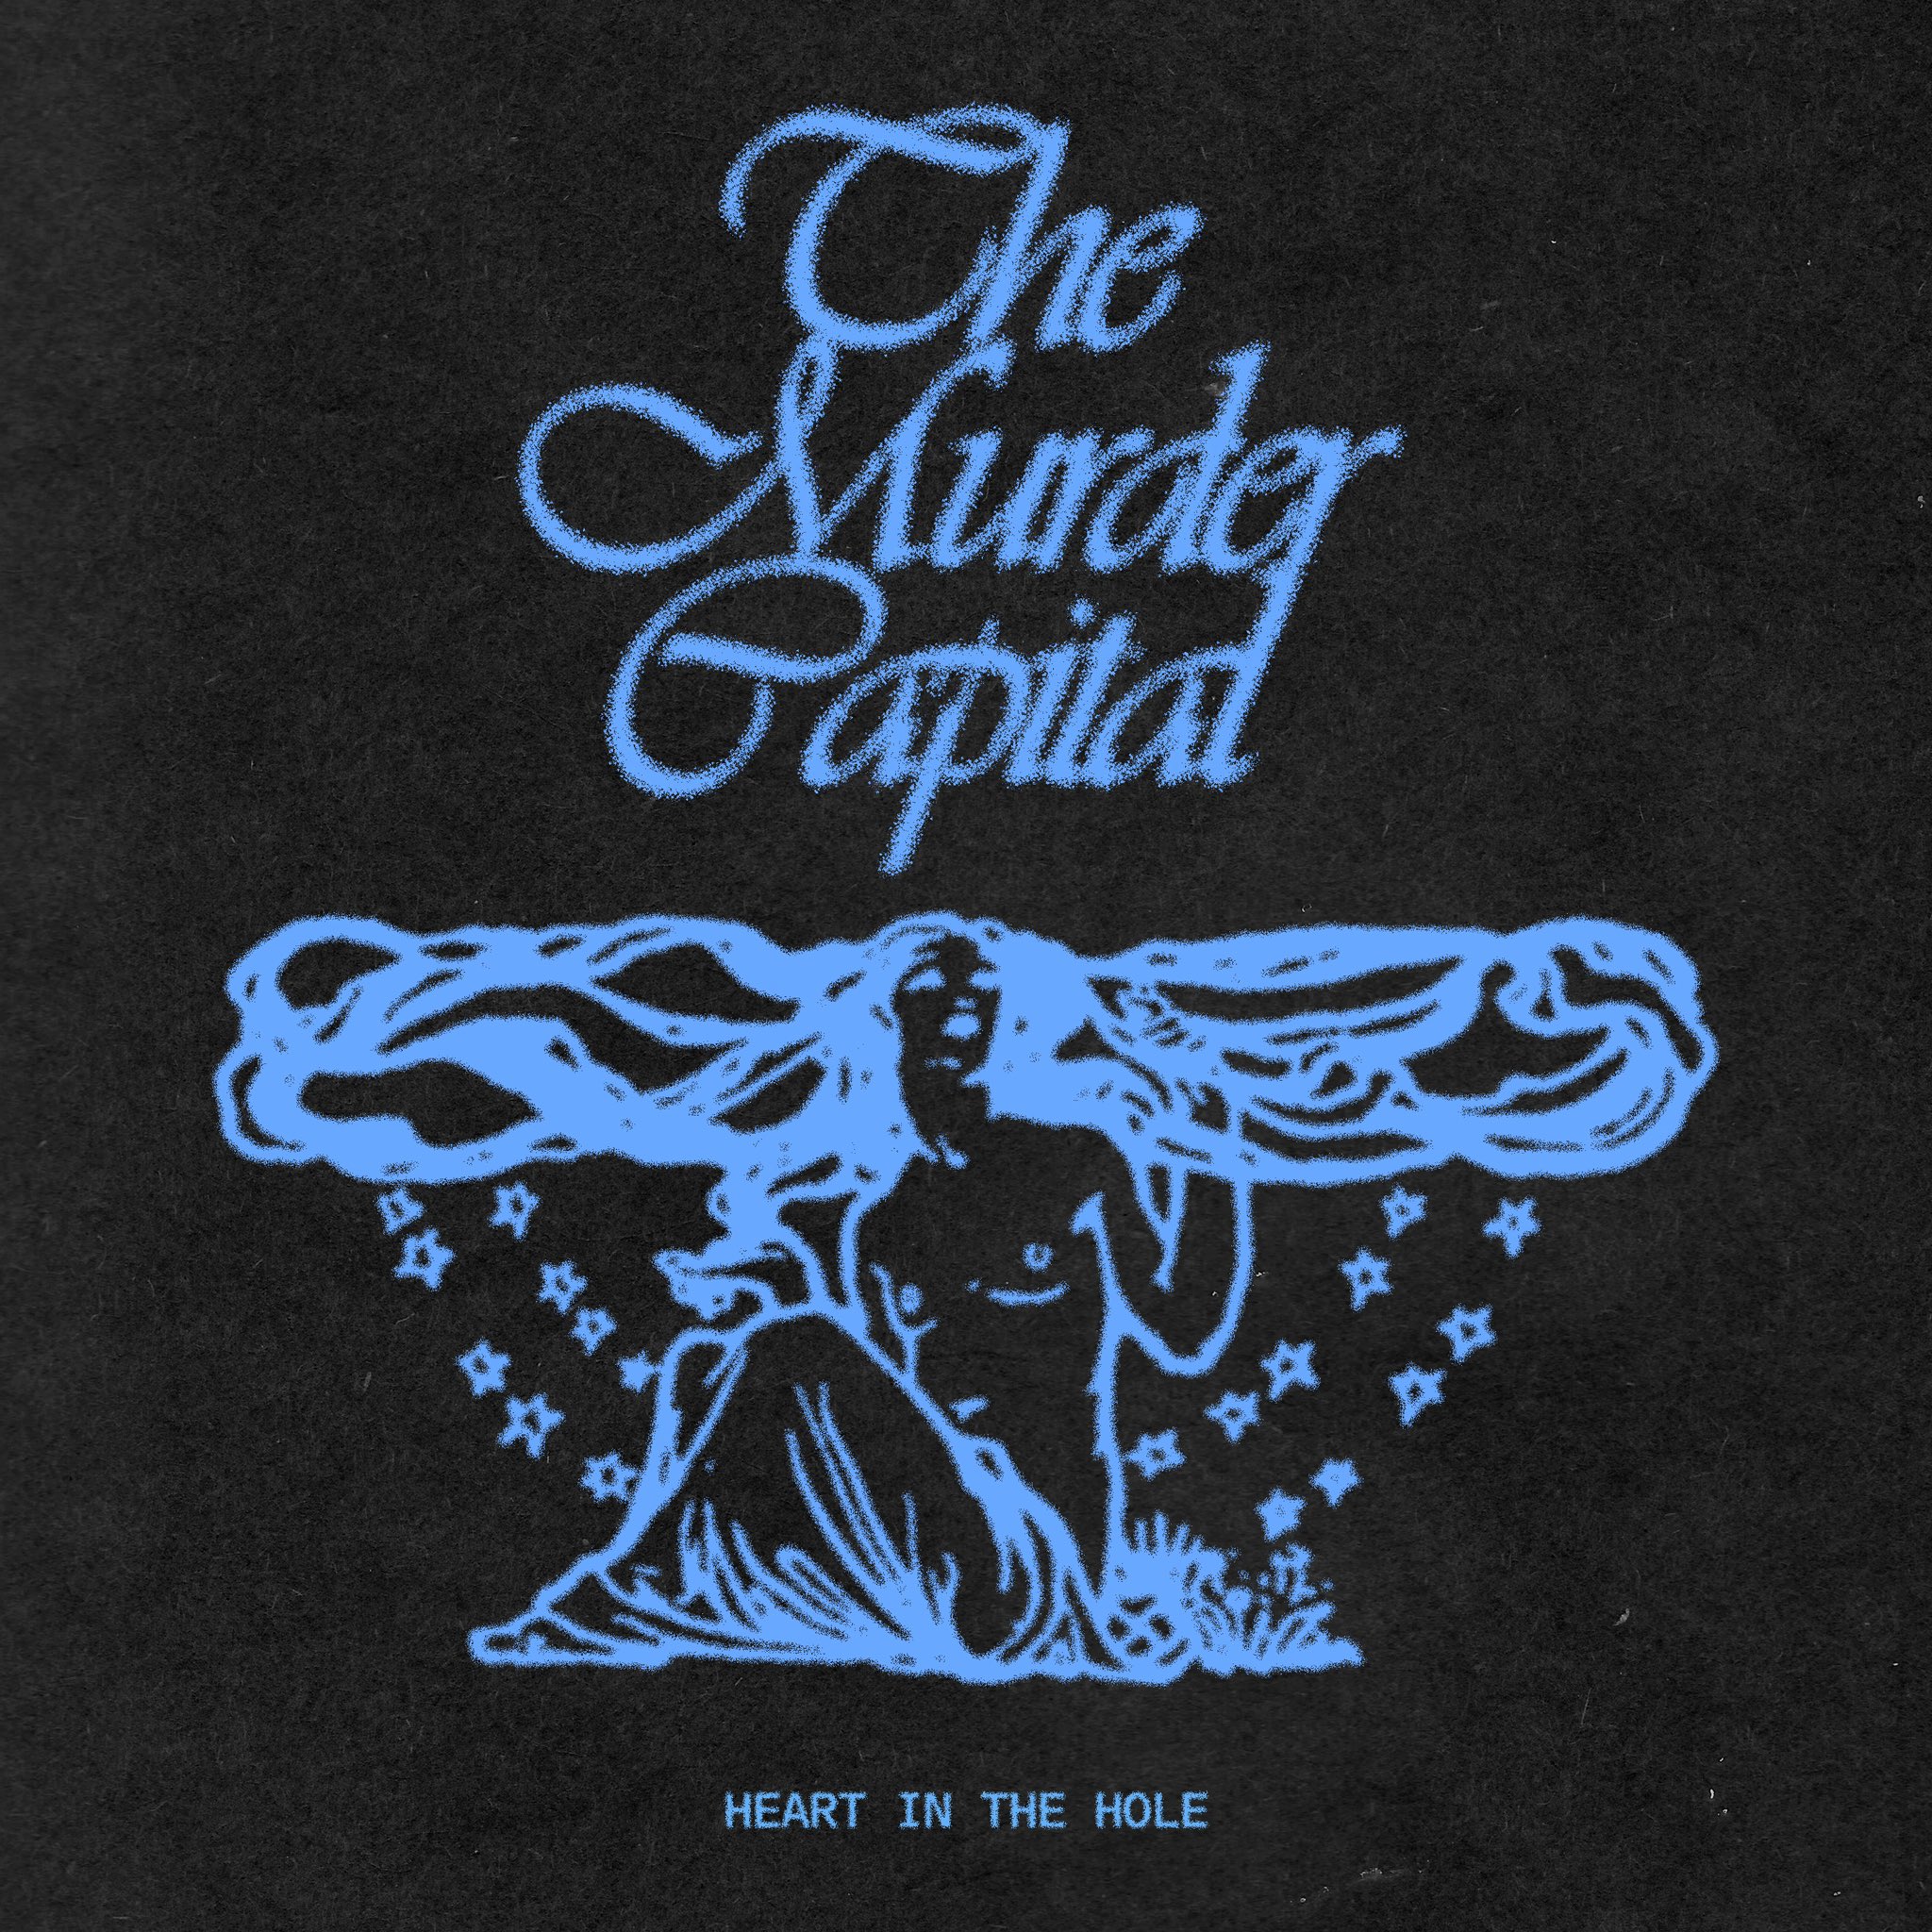 Post-punk shivers – The Murder Capital – Heart In The Hole